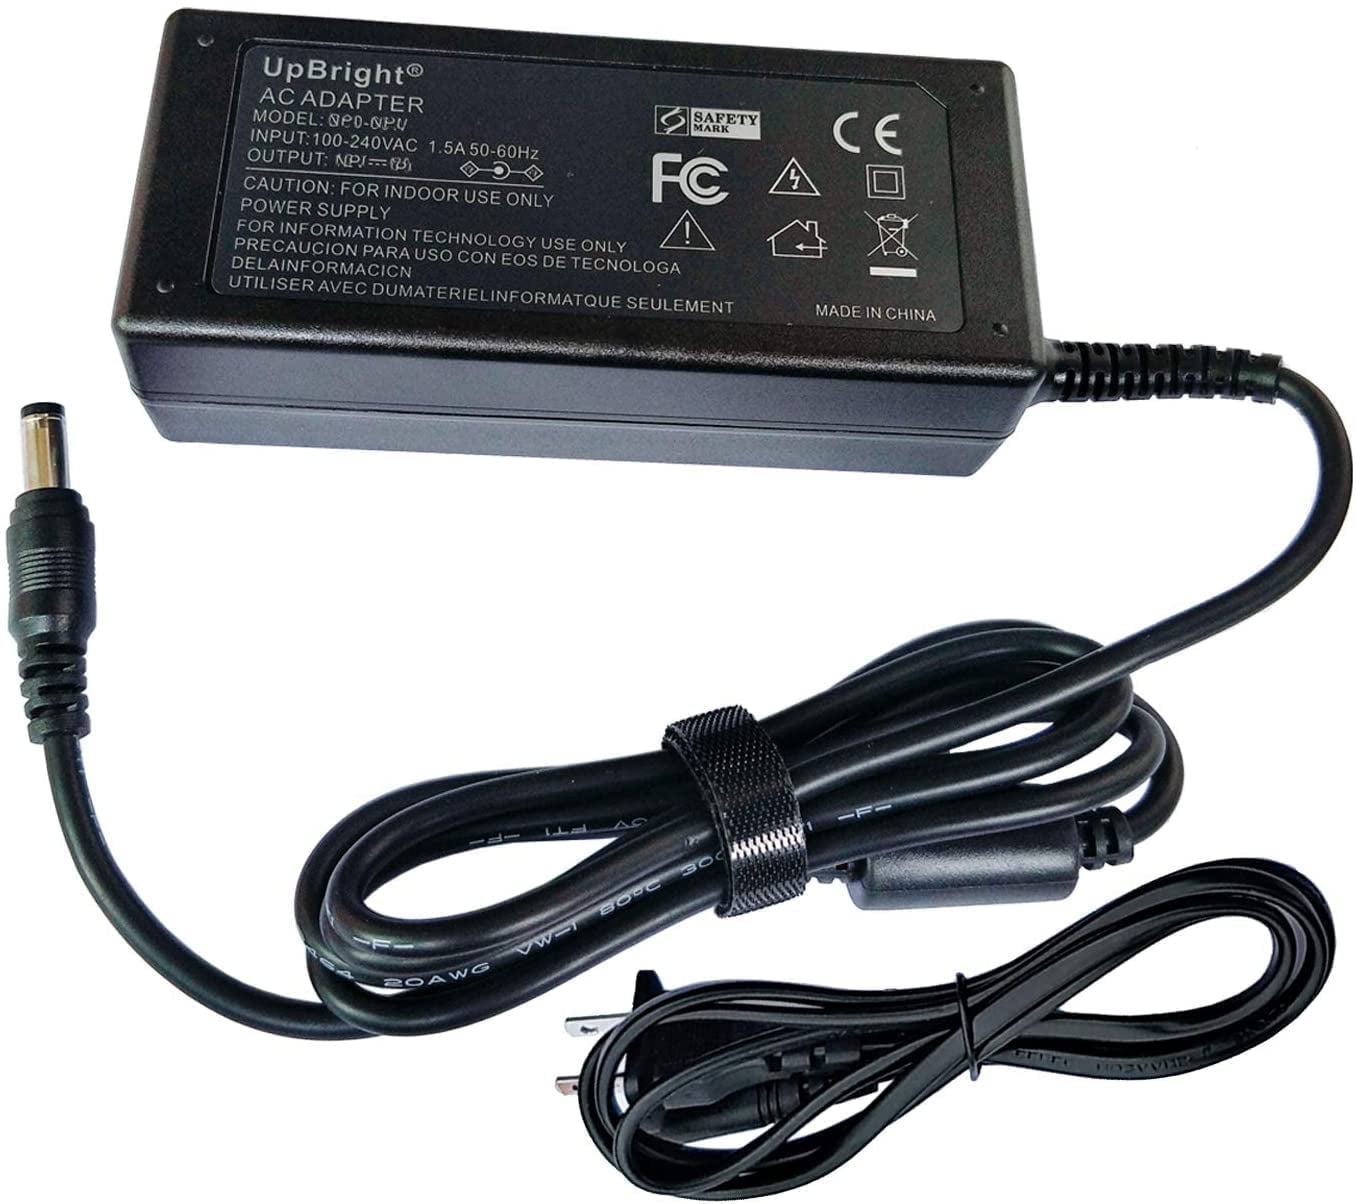  Power Cord For Cricut Explore Air 2/Expression  2/Maker/Explore/Explore Air/Explore One/Create/Cake/Mini/Original  Replacement For Cricut Maker KSAH1800250T1M2 Cutting 18V Charger Power  Supply